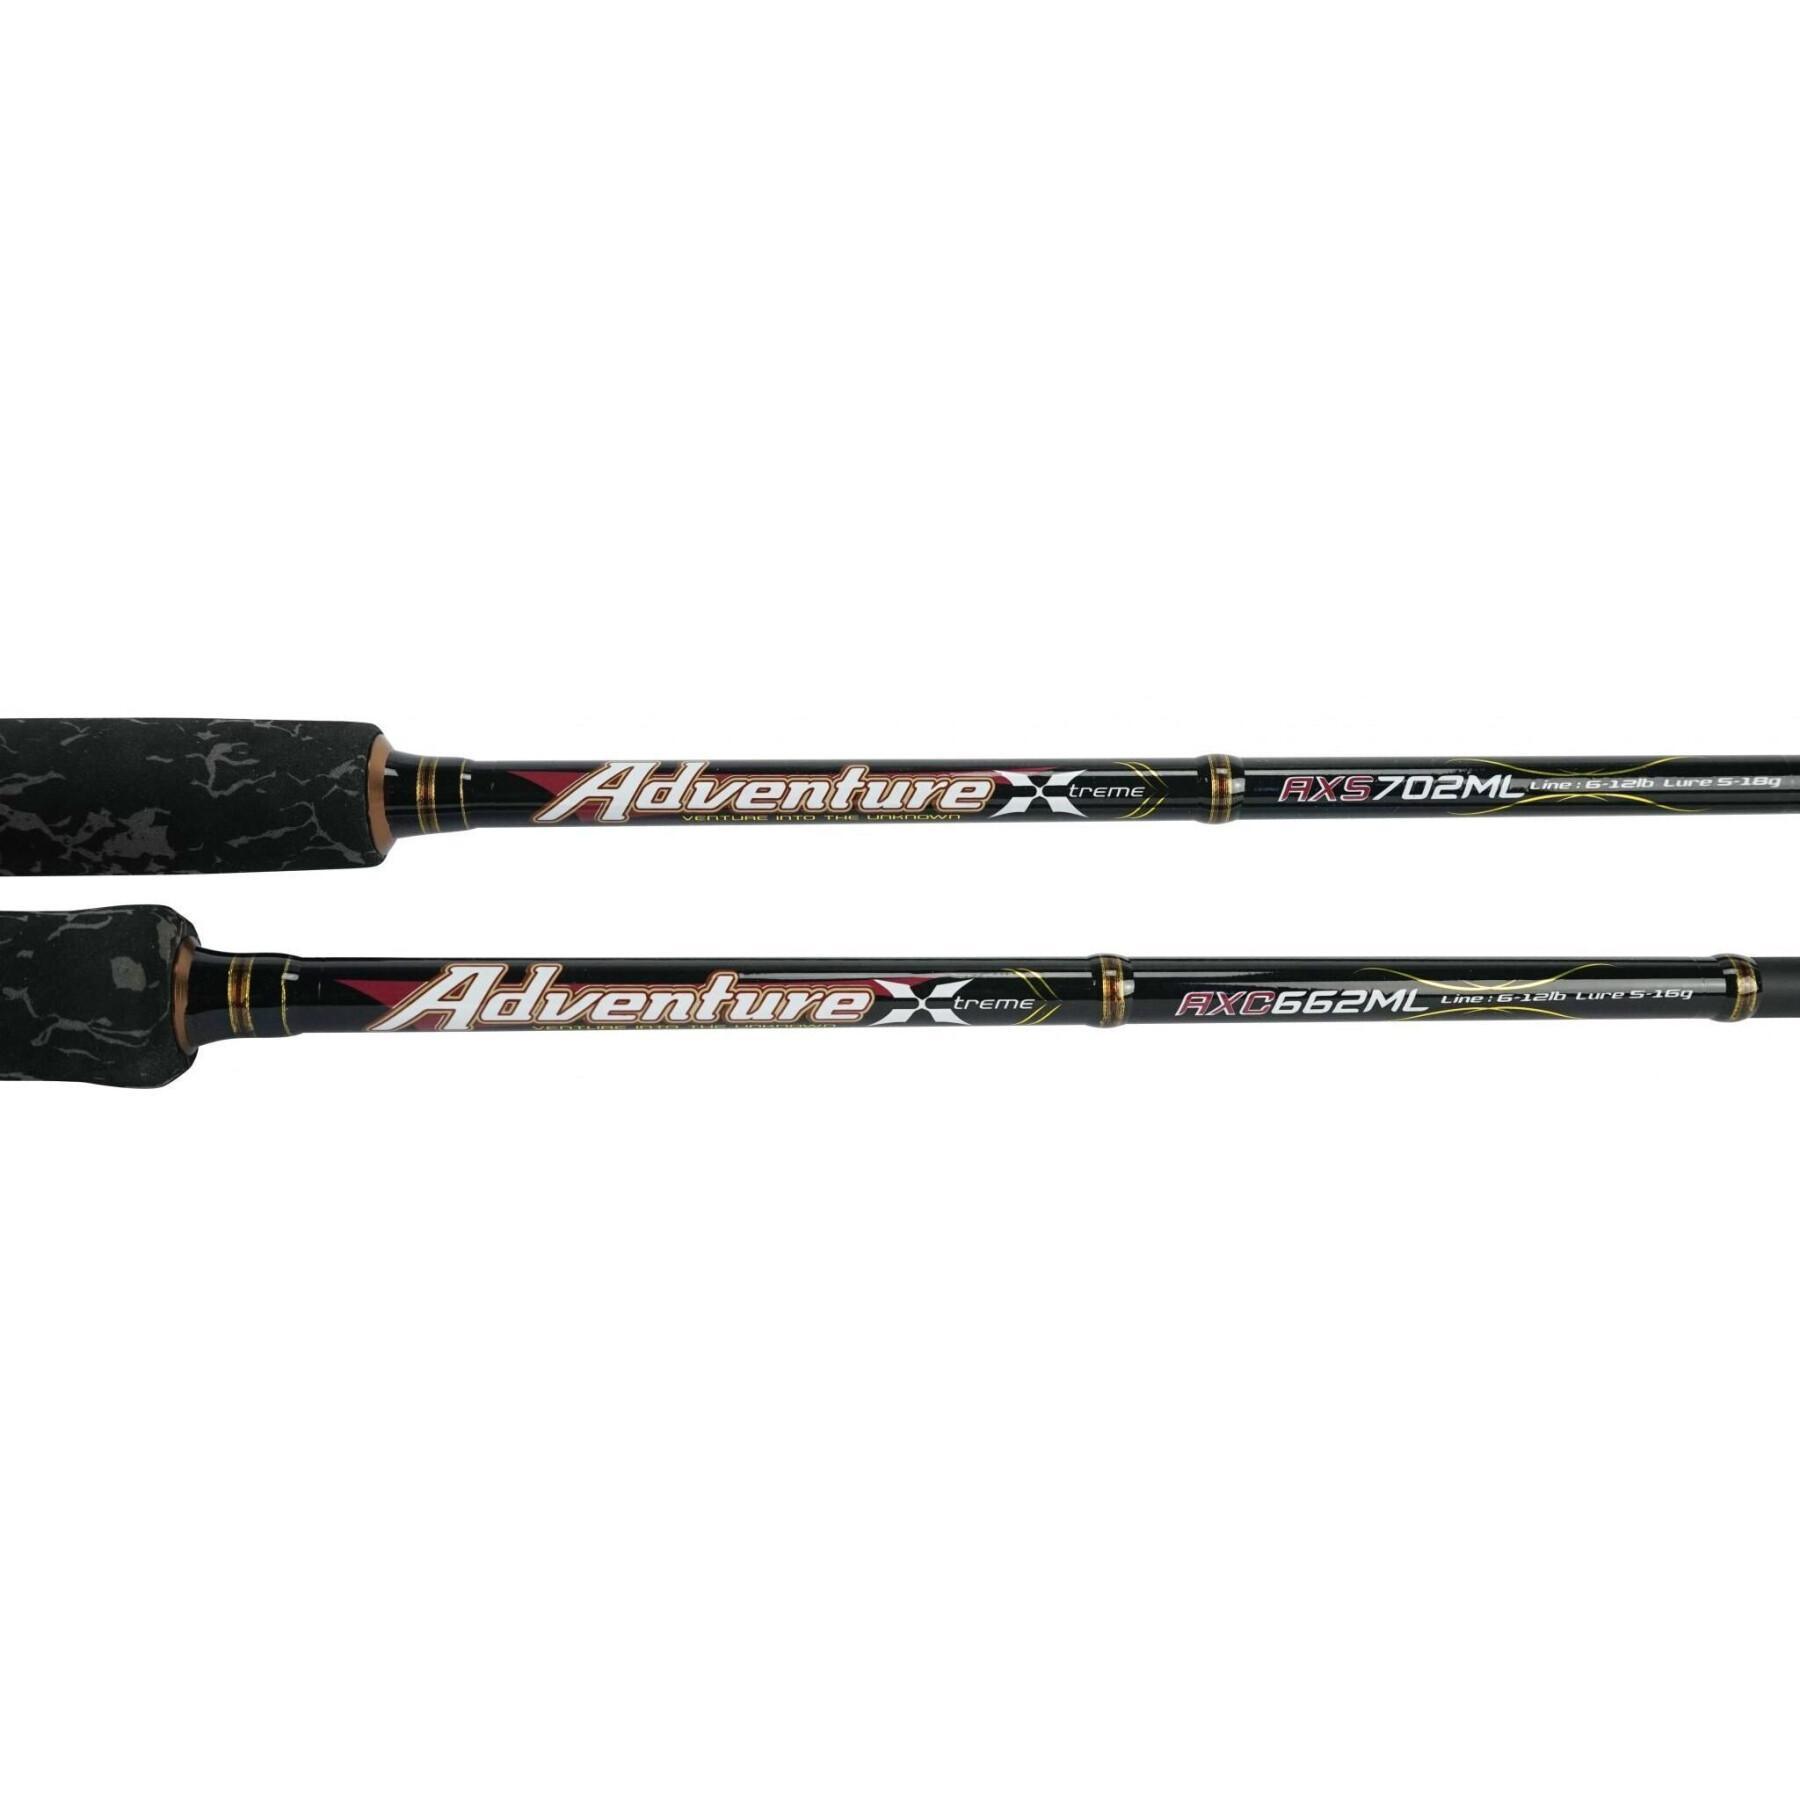 Cana casting Storm Adventure Xtreme 2-6lbs